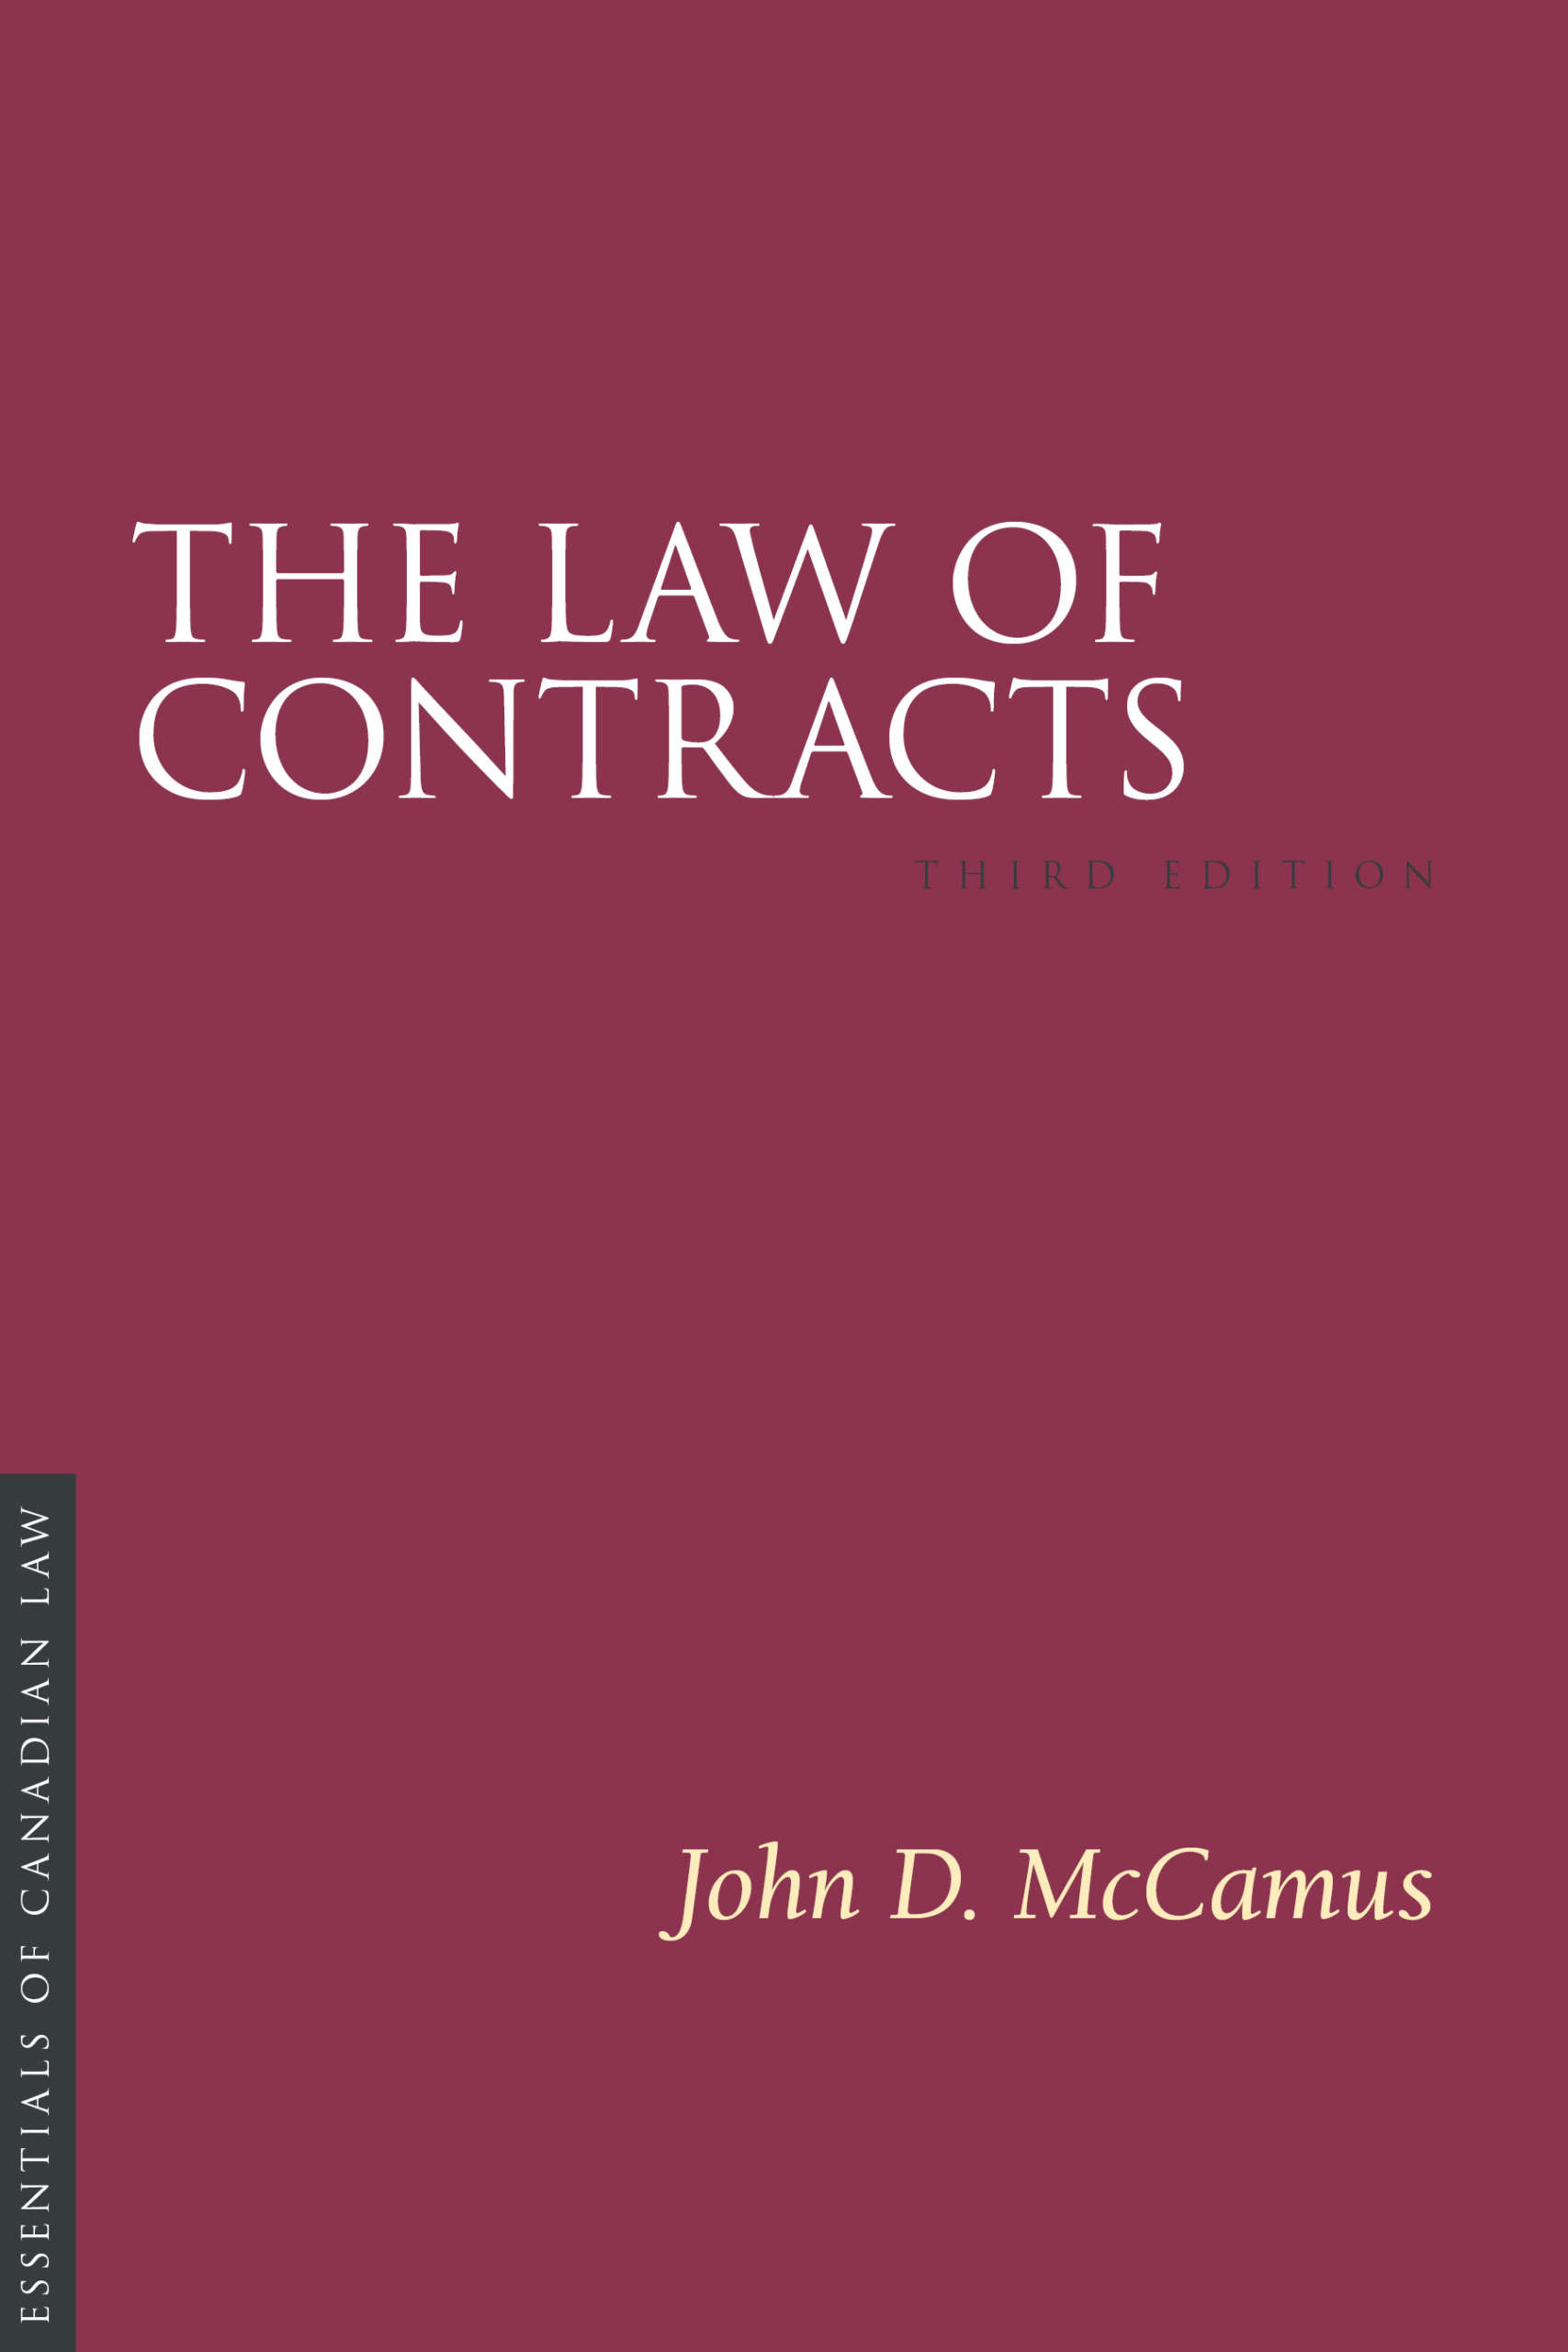 Contract law canada basics of investing overinvesting definition of terrorism